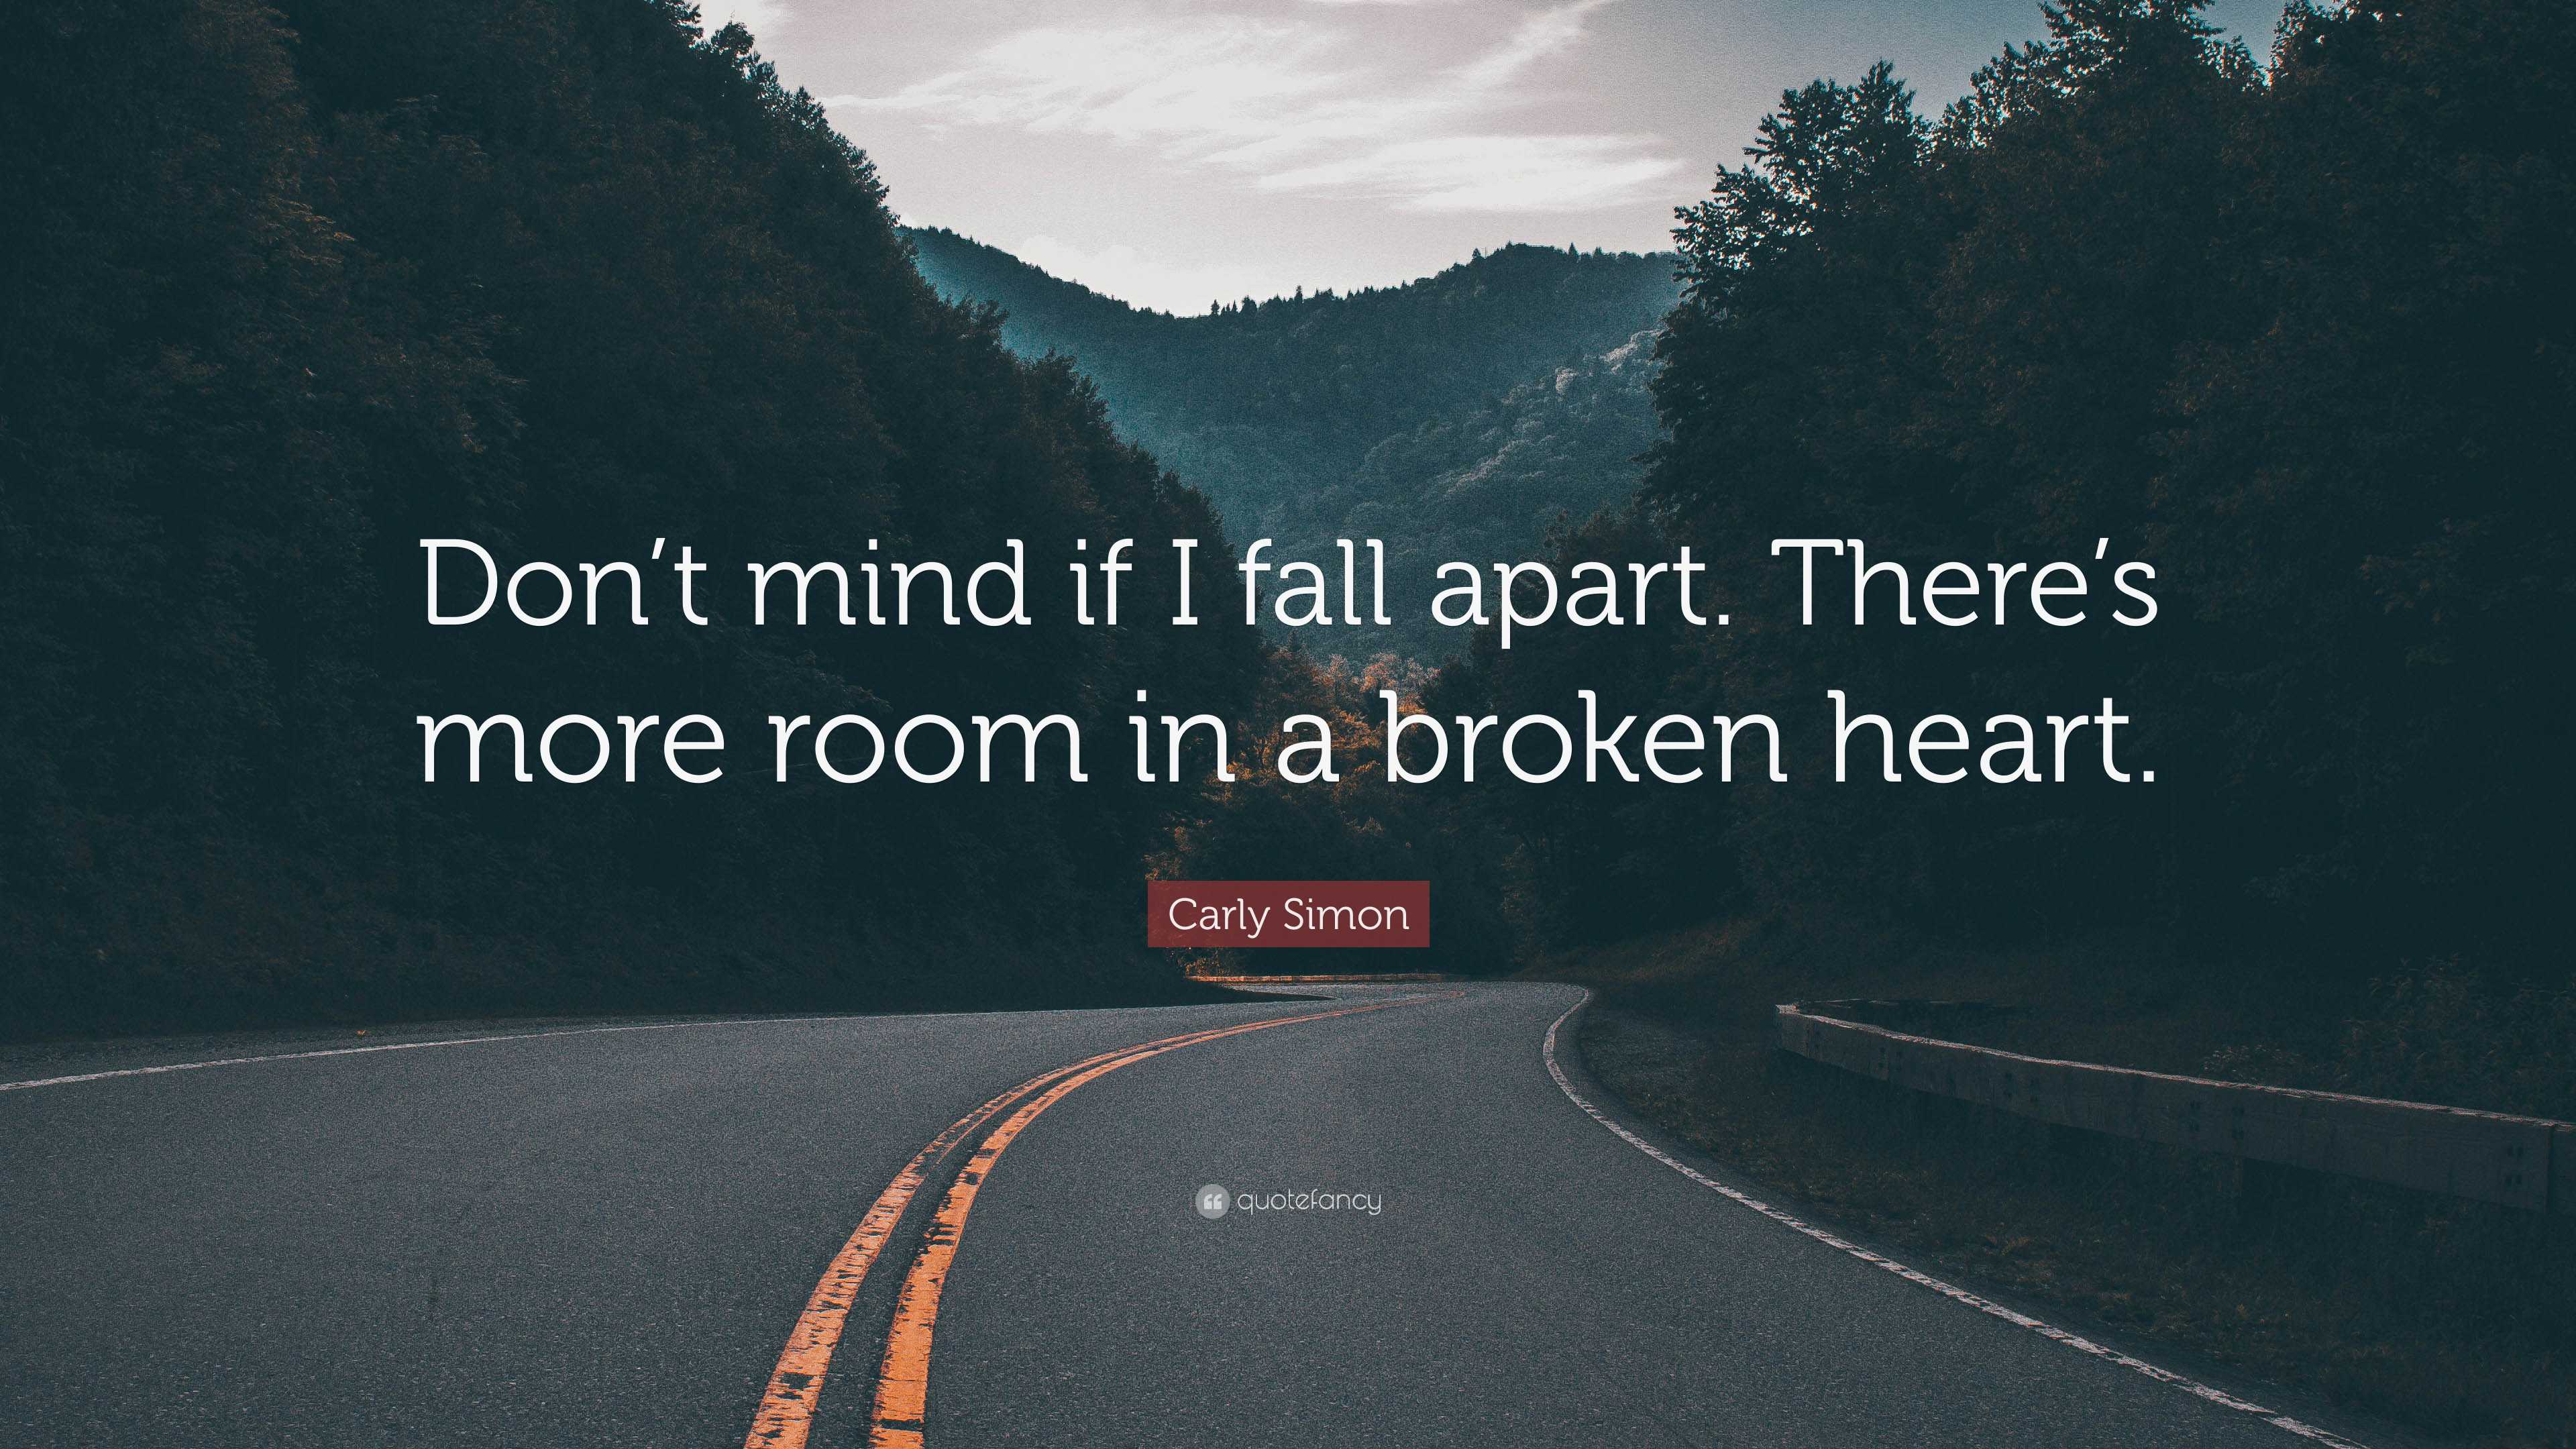 Carly Simon Quote: “Don’t mind if I fall apart. There’s more room in a ...